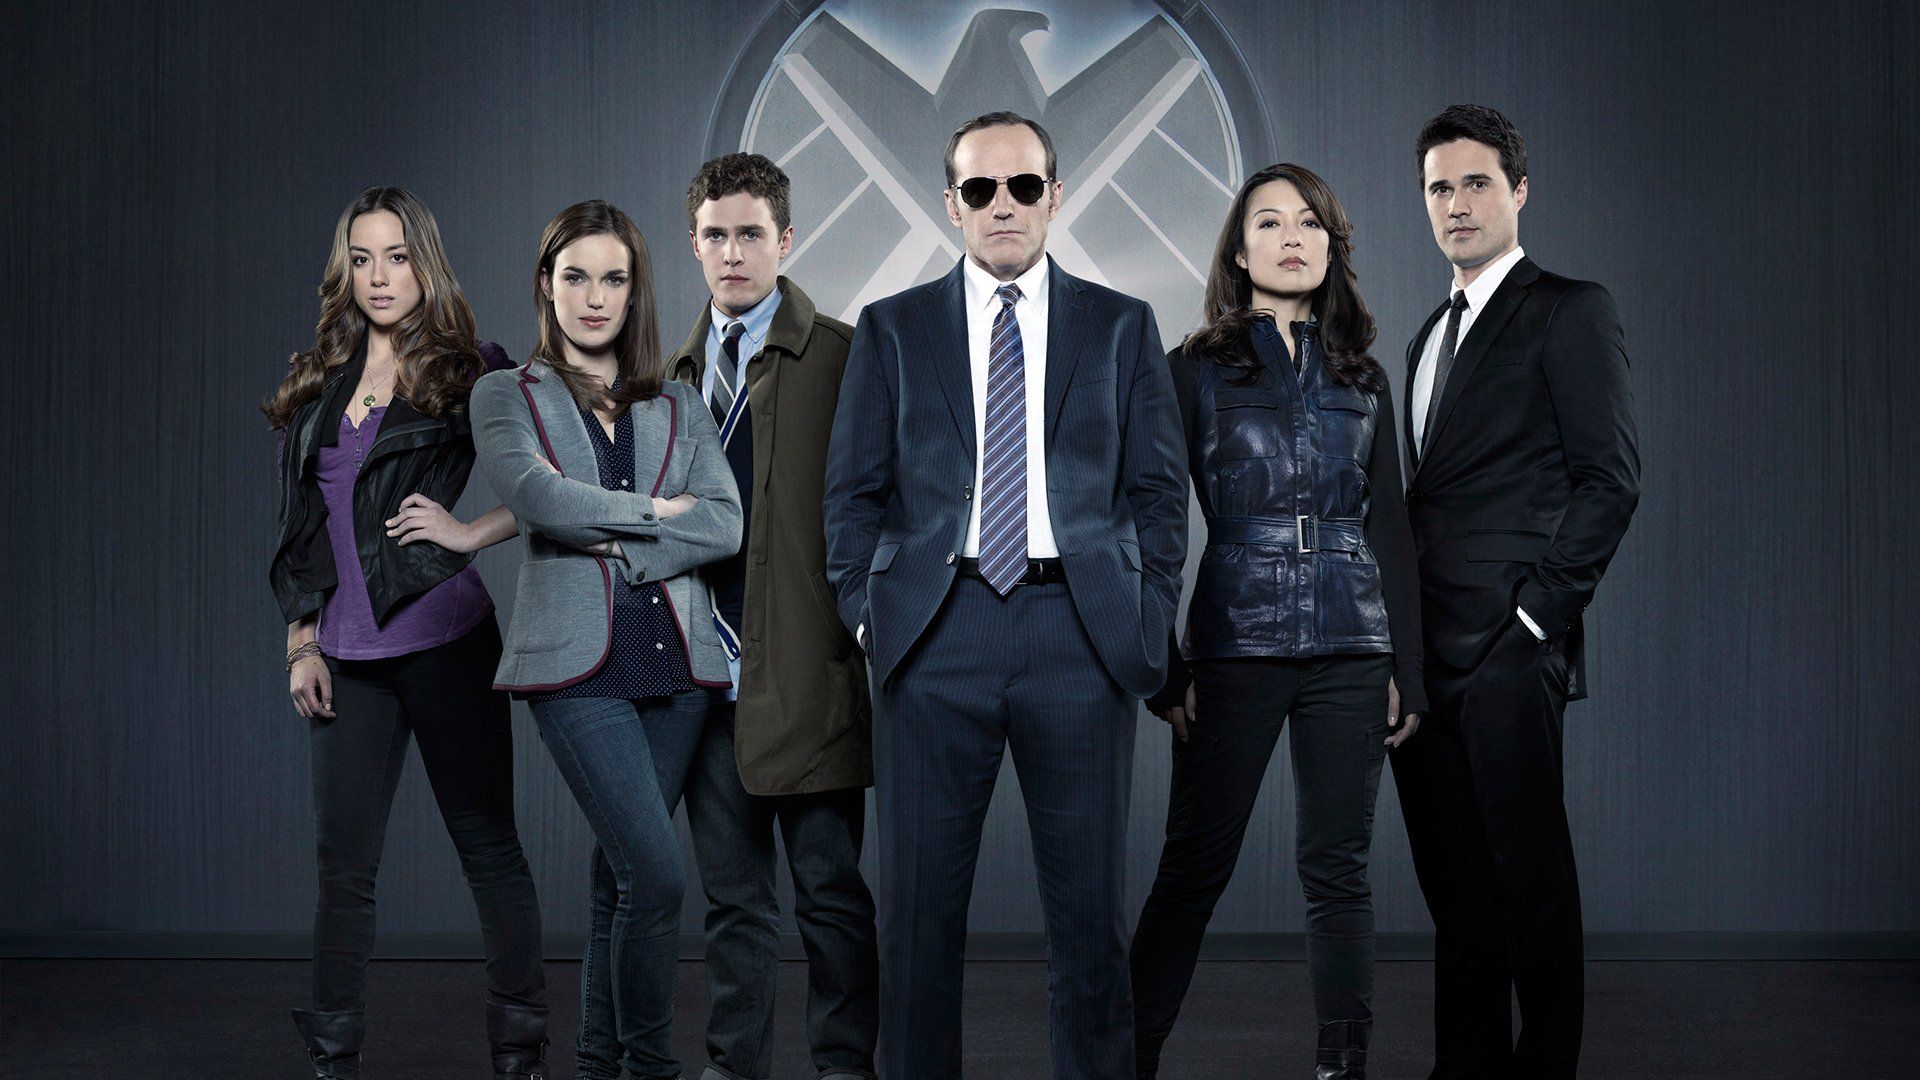 Marvel's Agents of S.H.I.E.L.D. HD Wallpaper. Background Image